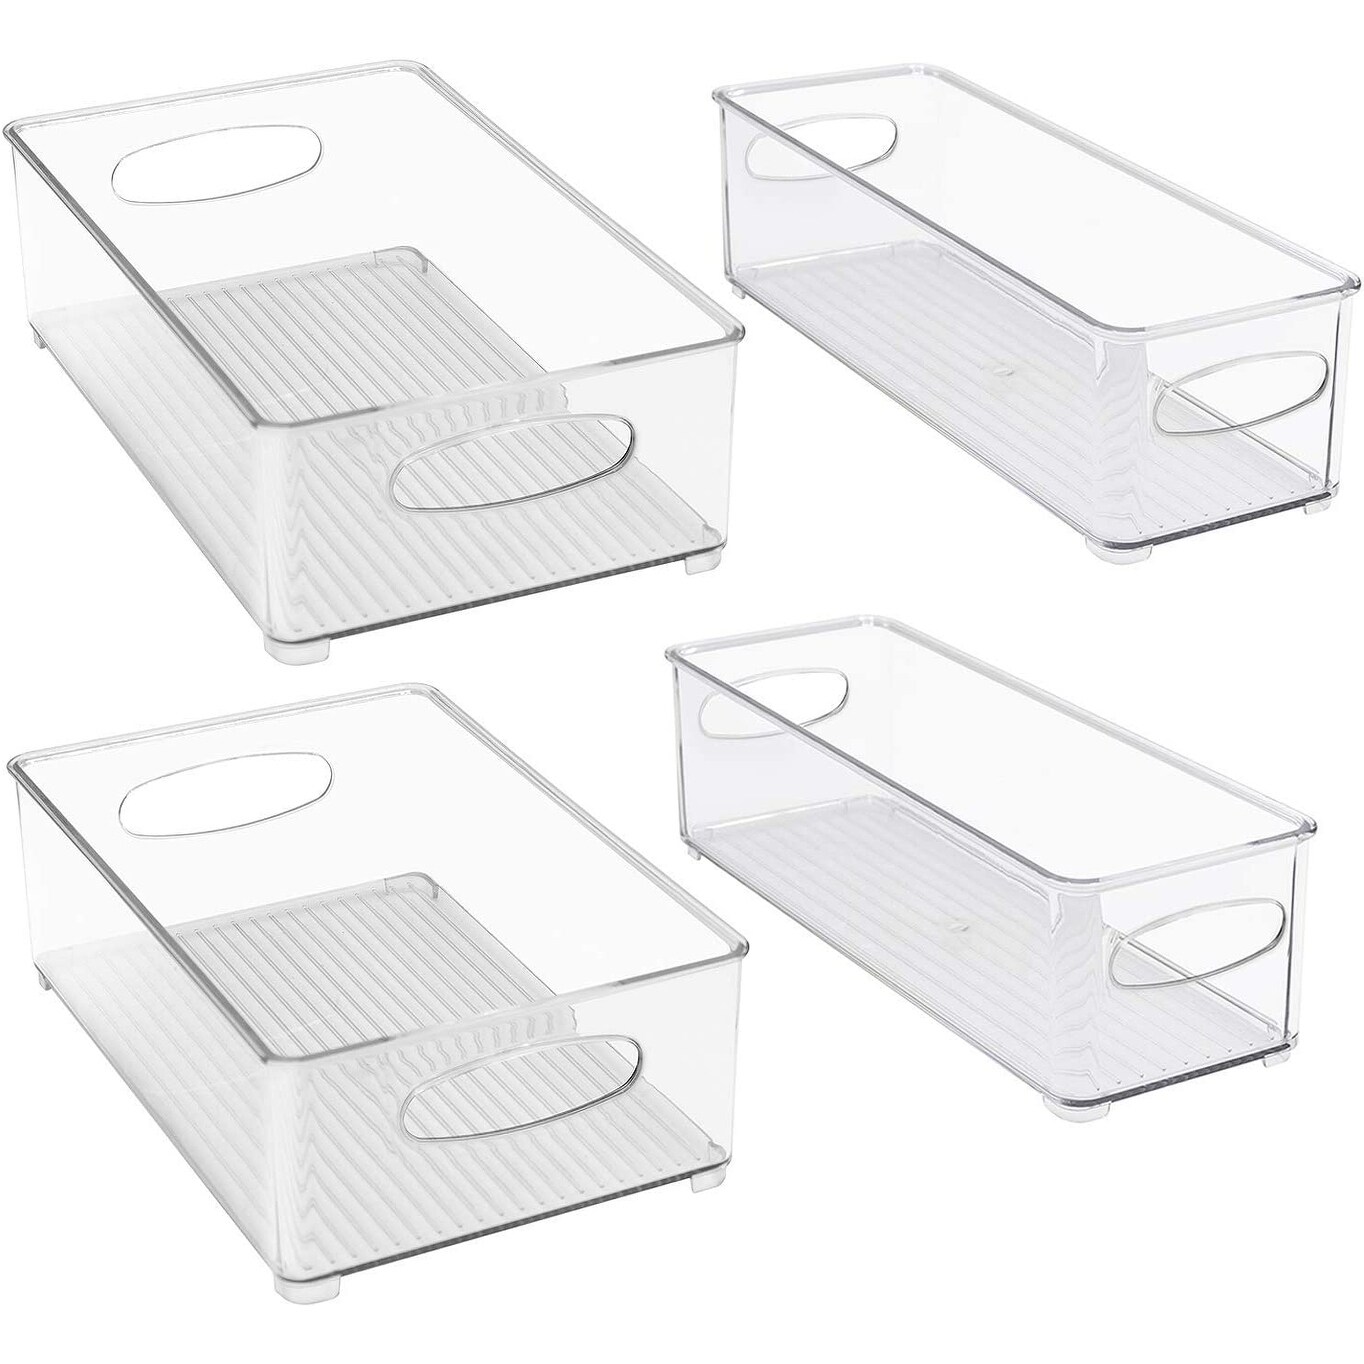 https://ak1.ostkcdn.com/images/products/is/images/direct/614b86458caf87a0d1e5bfdee1f37db42da564aa/Sorbus-Clear-Plastic-Organizer-Storage-Bin-Containers-with-Handles-for-Pantry-Food-%26-Kitchen-Fridge-%286-Pack%29.jpg